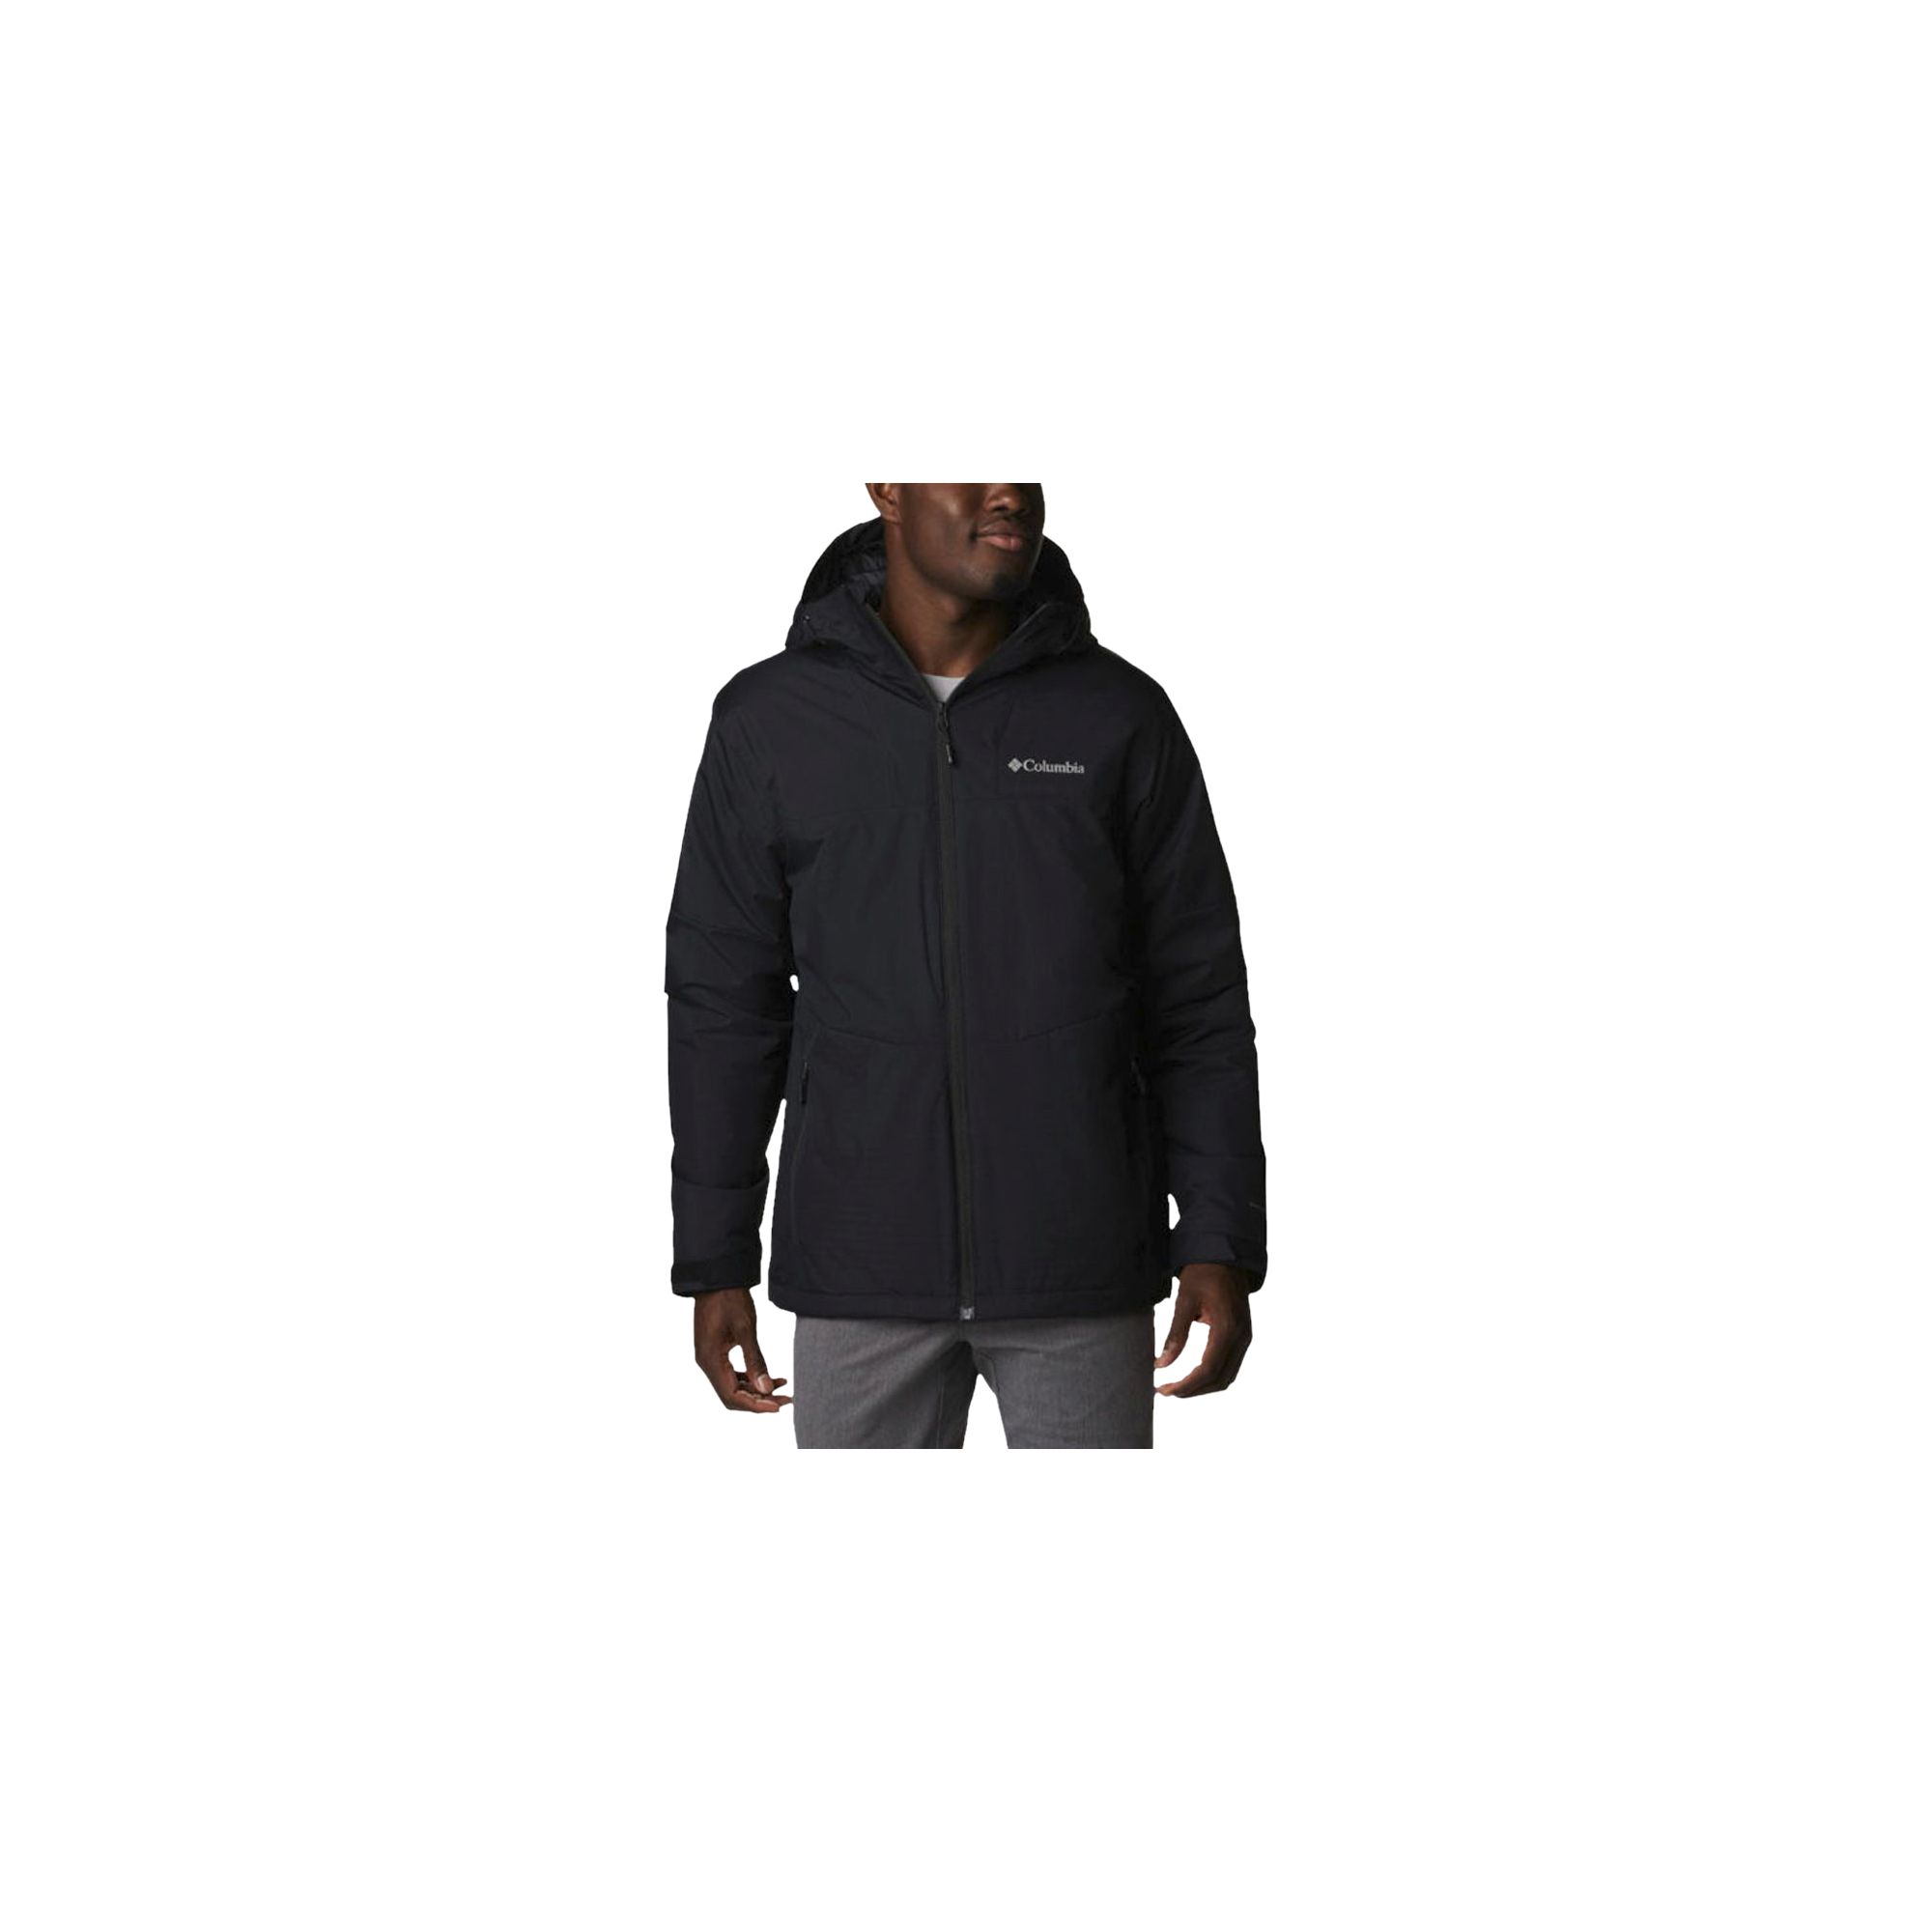 Point Park insulated COLUMBIA